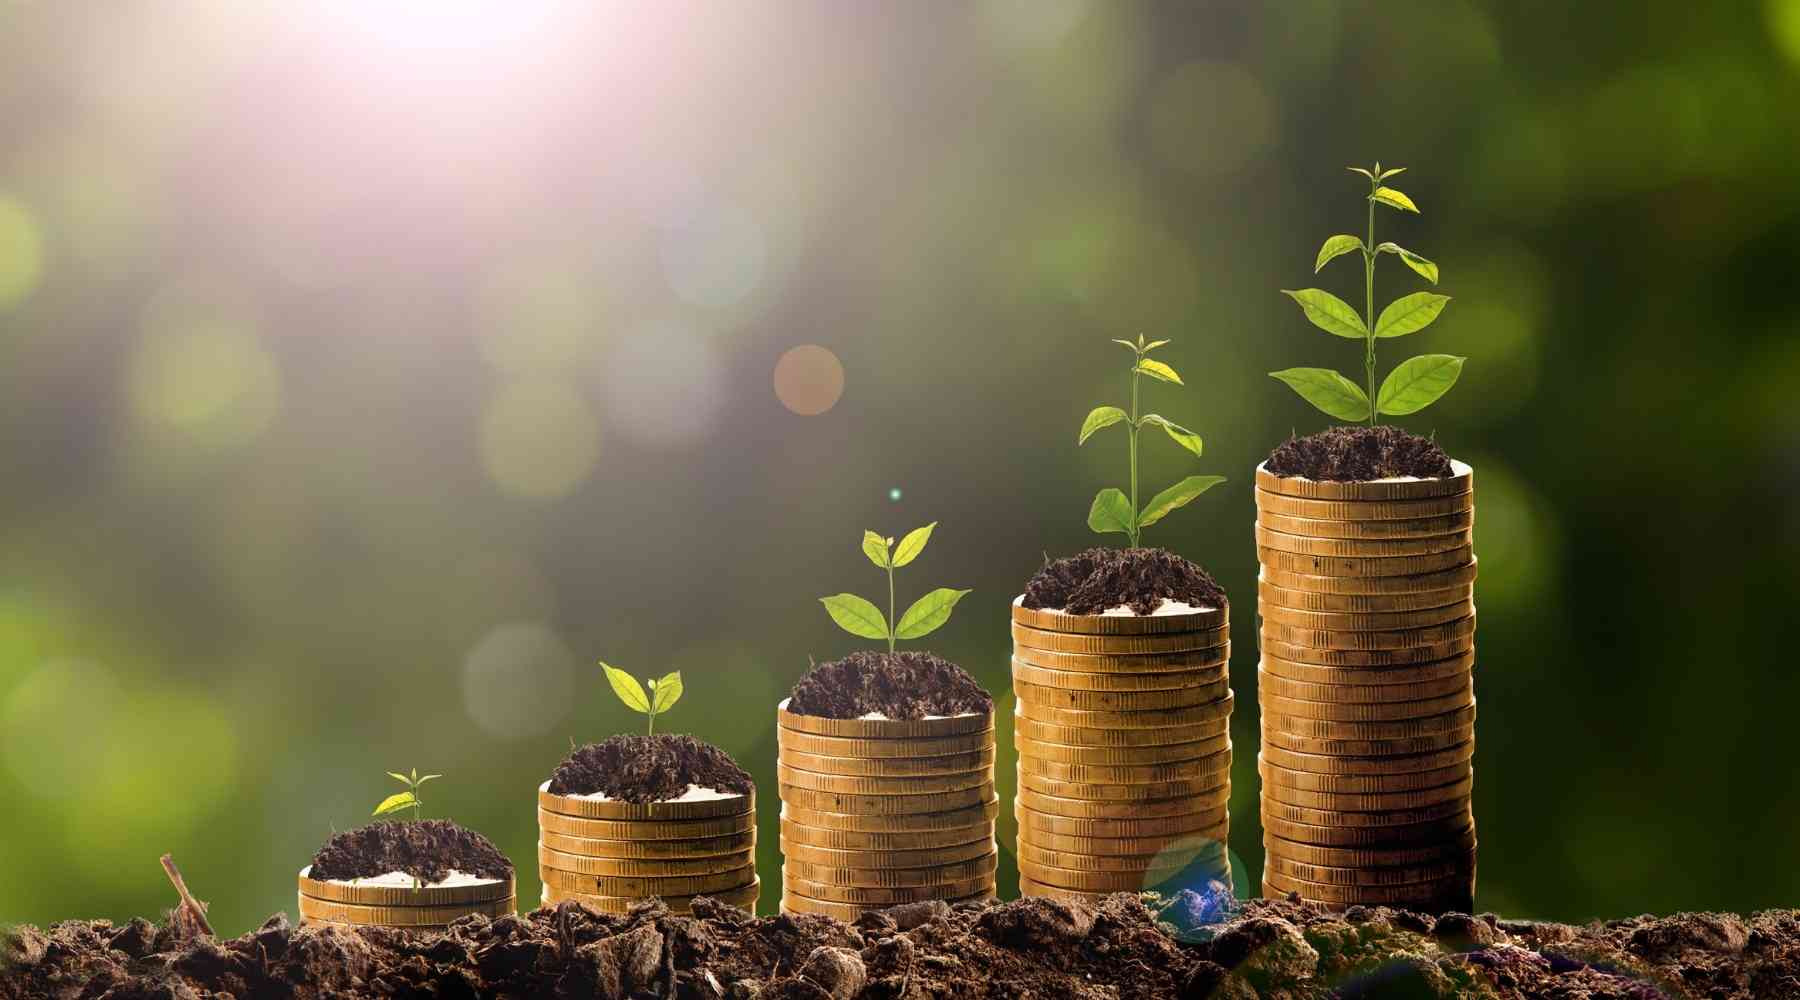 20 Best Compound Interest Investments (August 2022 Guide)